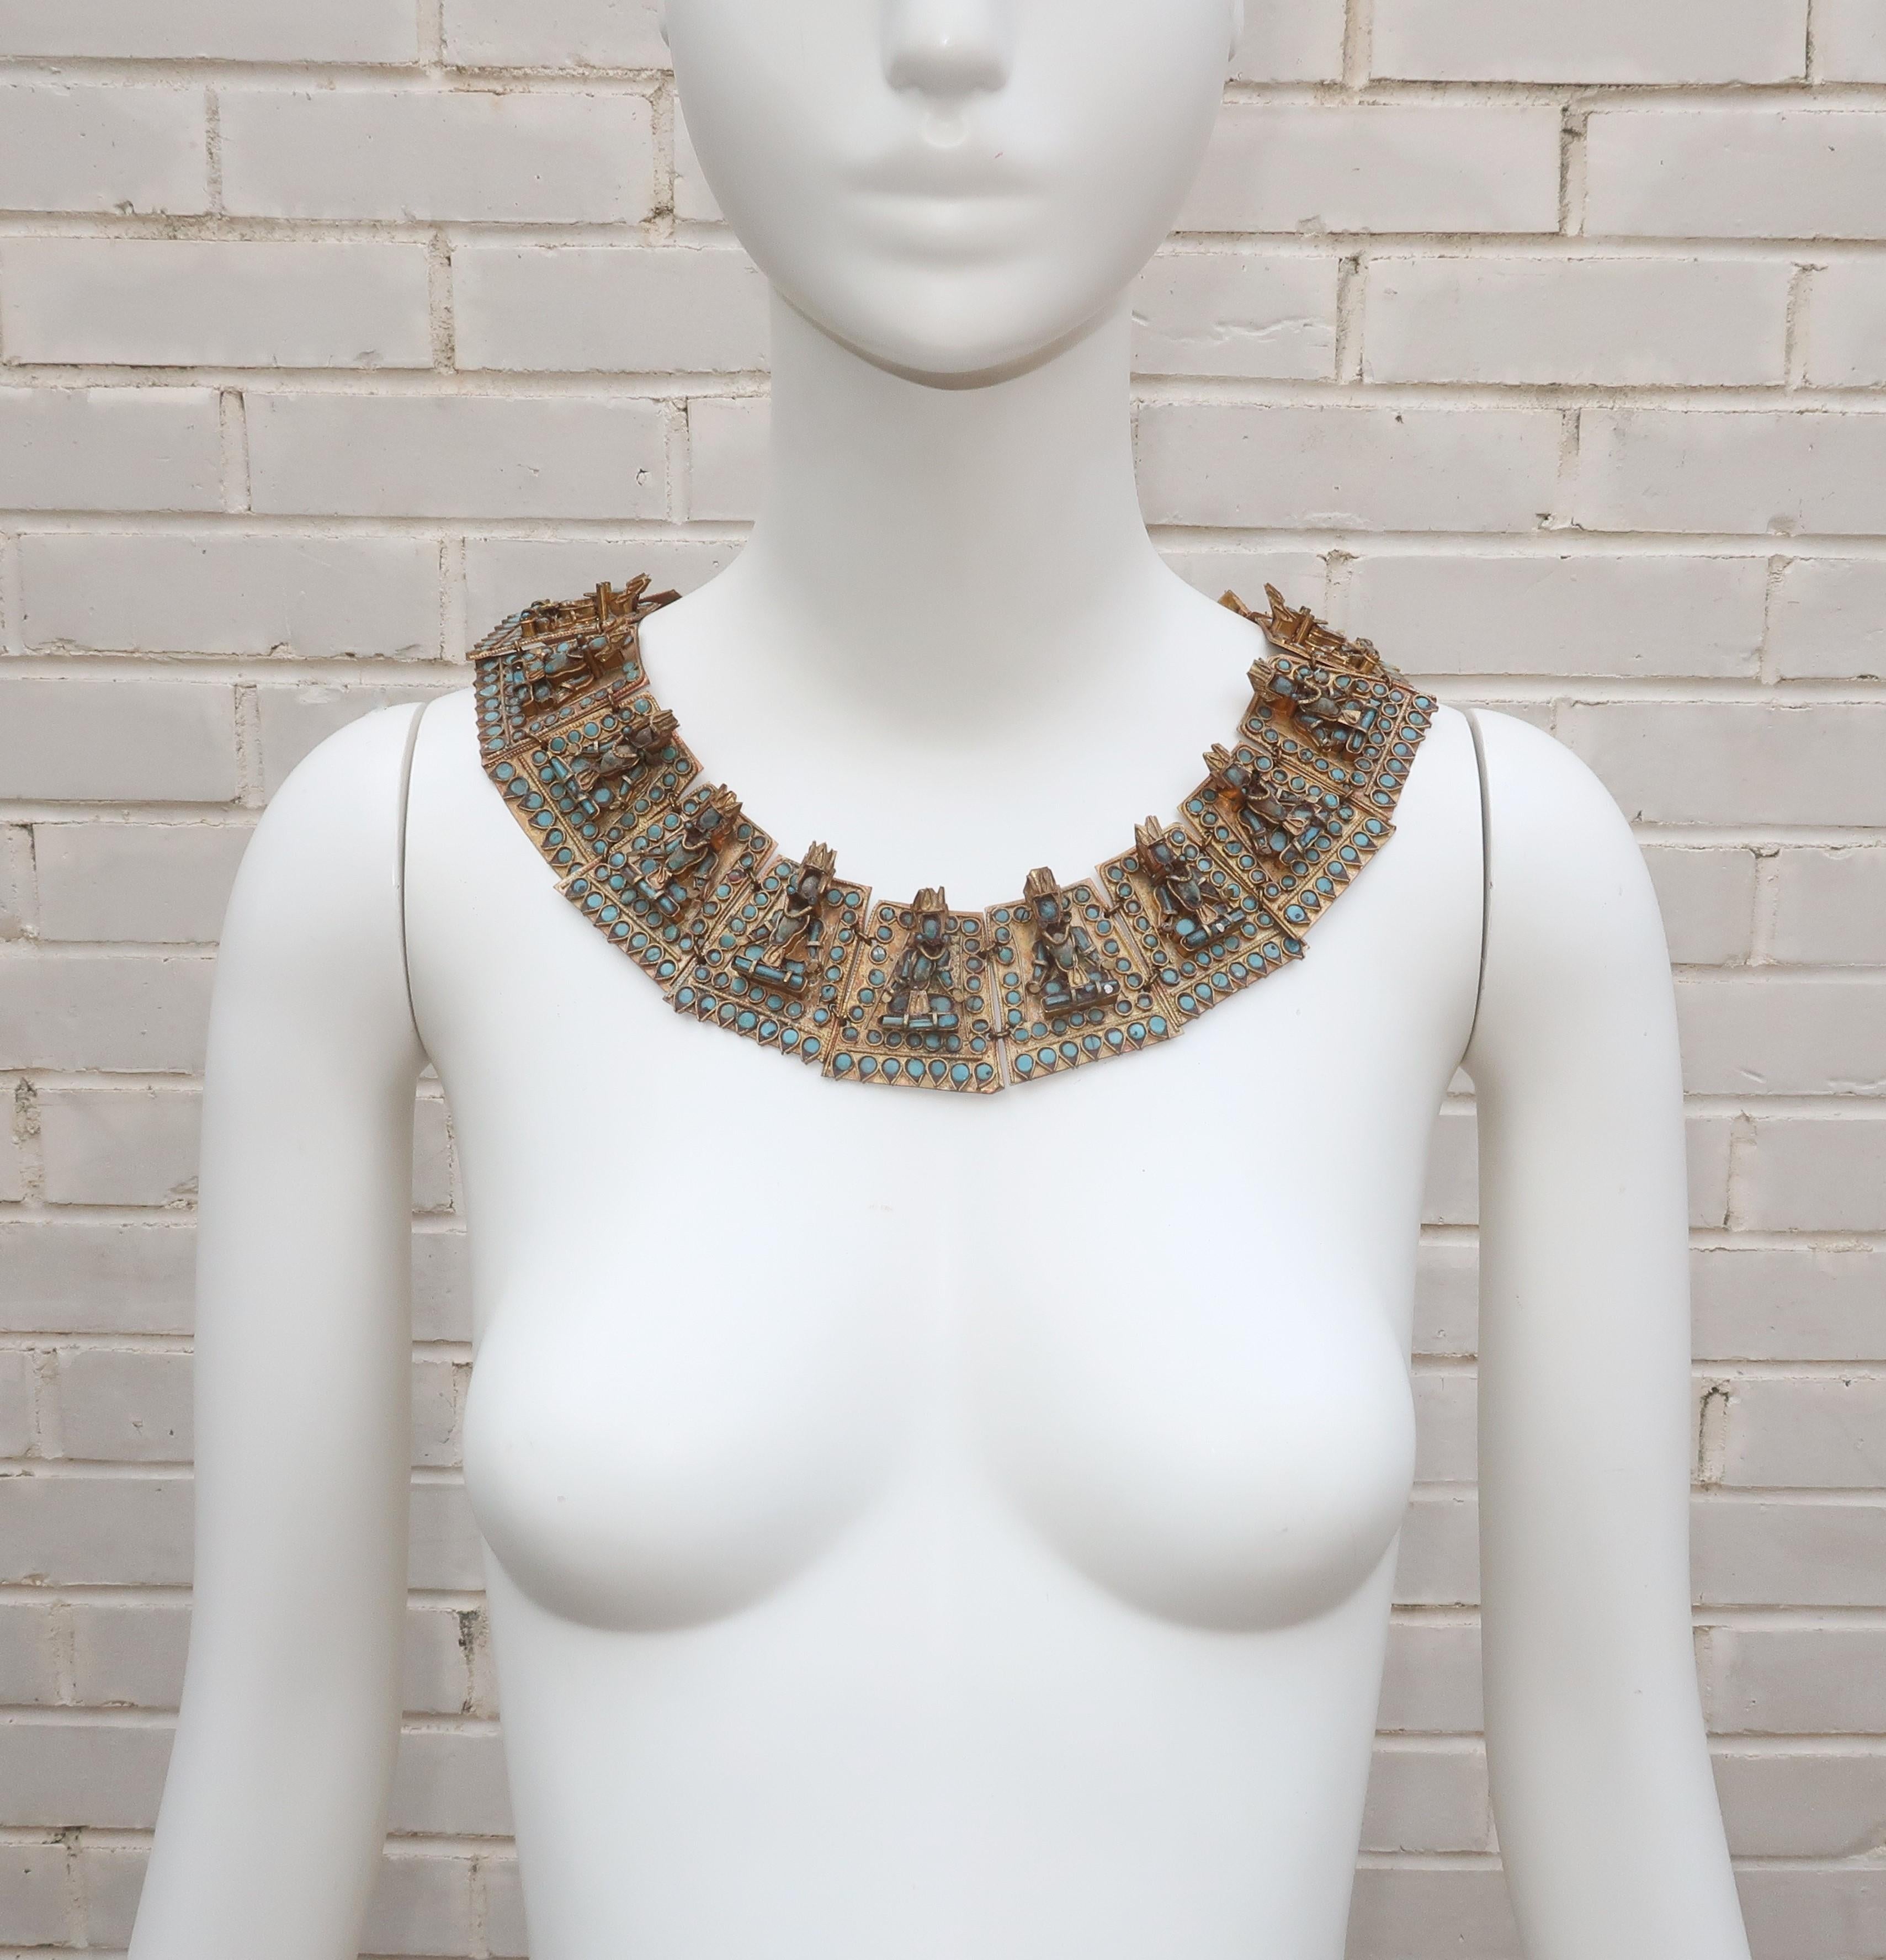 Vintage Thailand Collar Bib Necklace With Turquoise Glass Beads 2